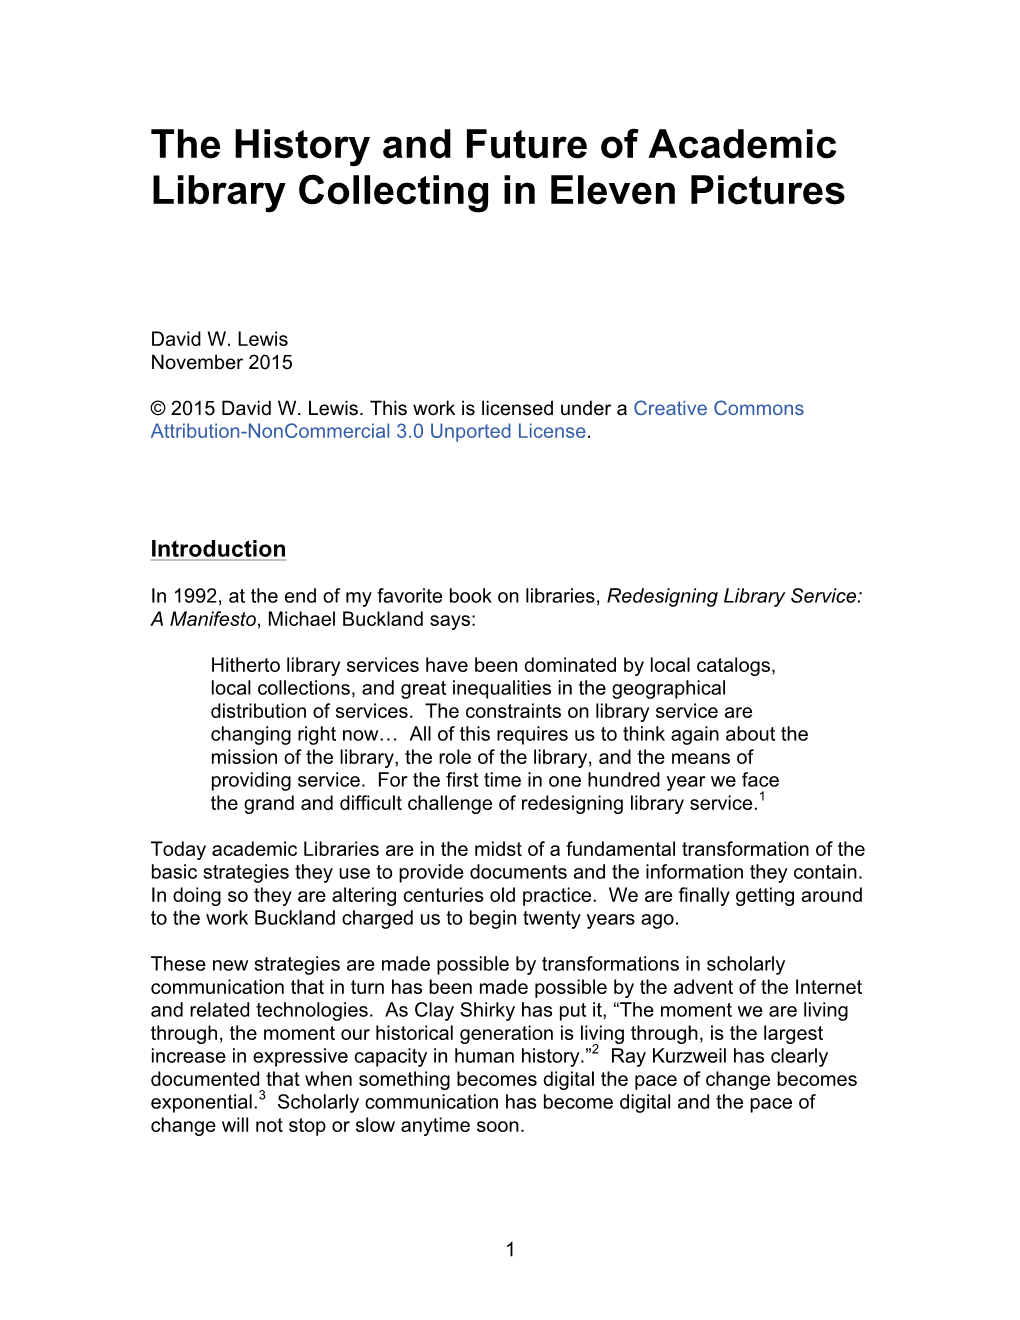 The History and Future of Academic Library Collecting in Eleven Pictures